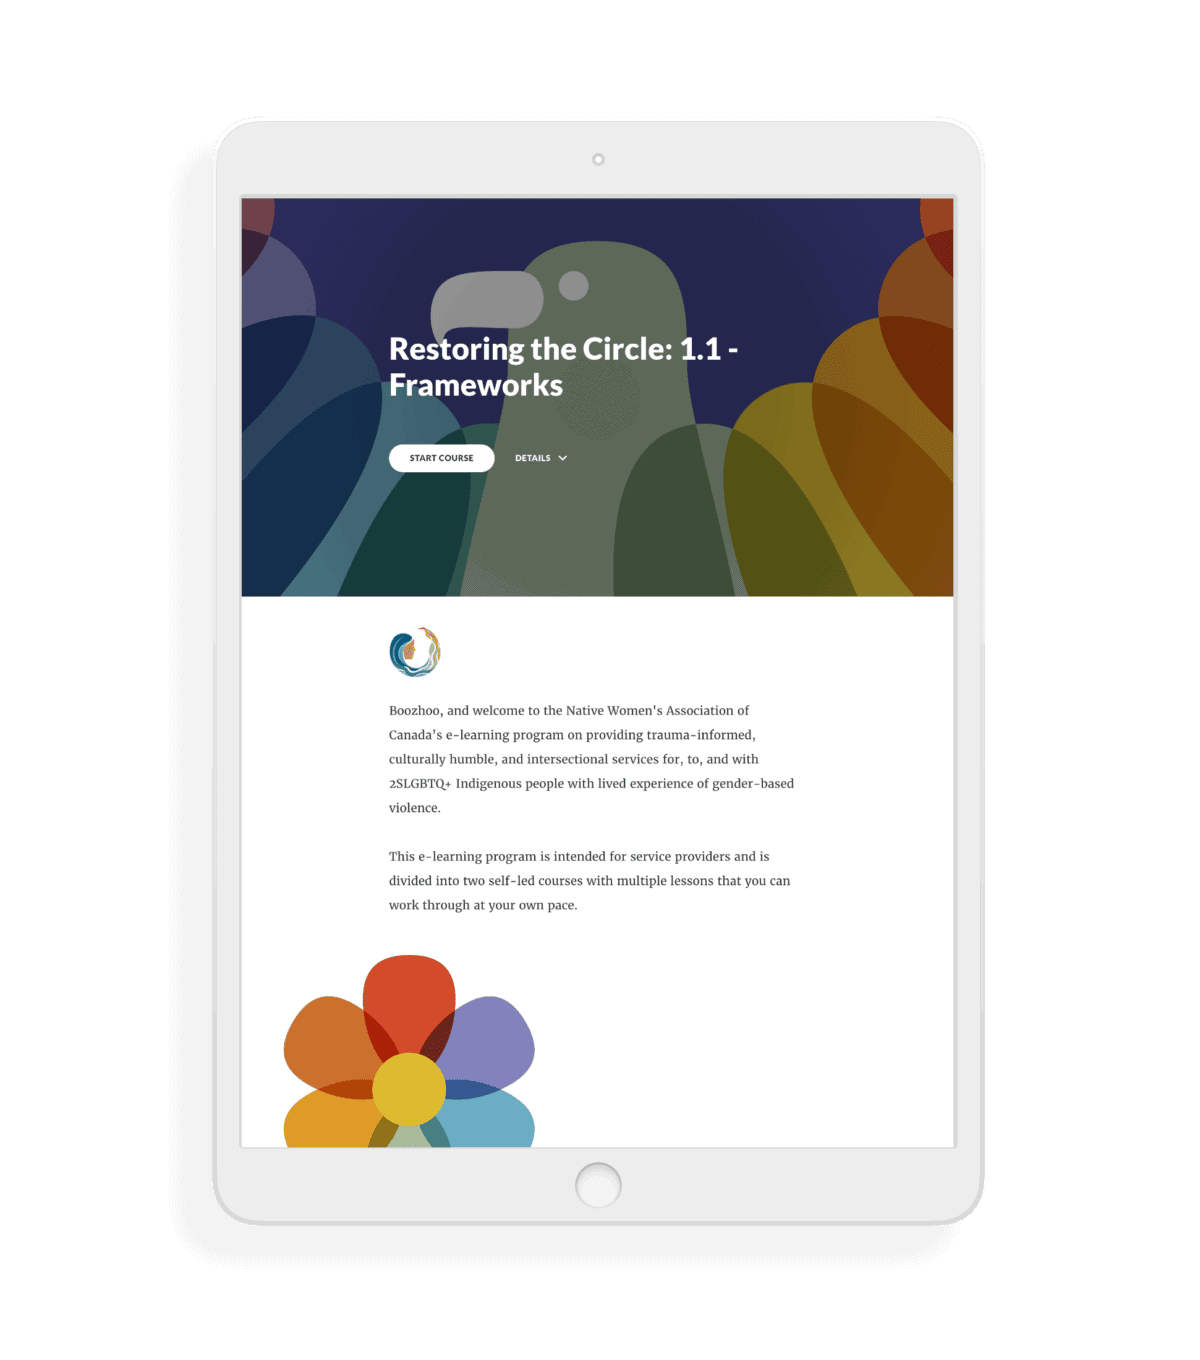 An iPad mockup of the Restoring the Circle course's first module titled 1.1 - Frameworks. The module features a welcome blurb about the course, which aims to provide trauma-informed, culturally humble, and intersectional services for, to, and with 2SLGBTQ+ Indigenous people with lived experience of gender-based violence.